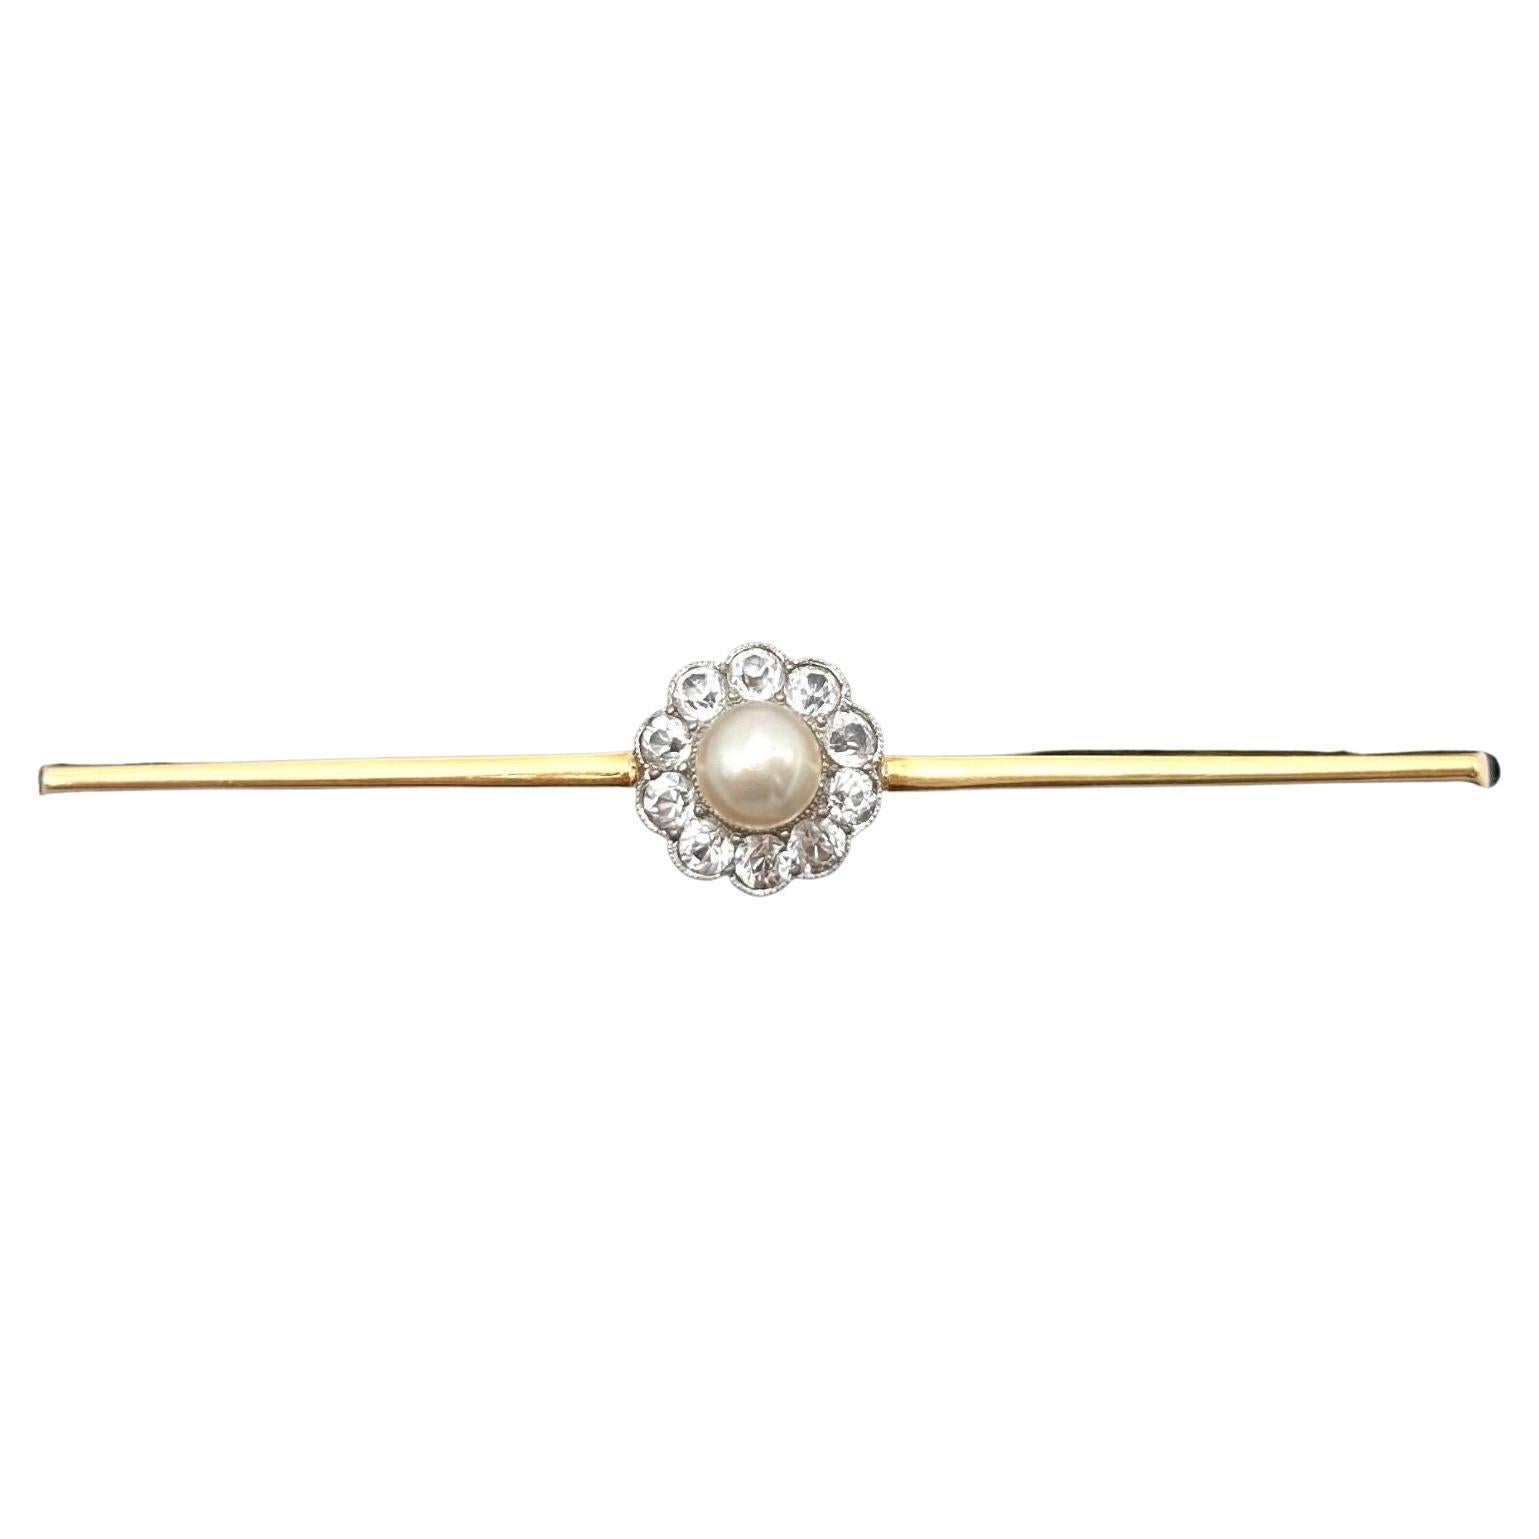 Antique gold bar brooch with pearl and white sapphires, Sweden, around 1920. For Sale